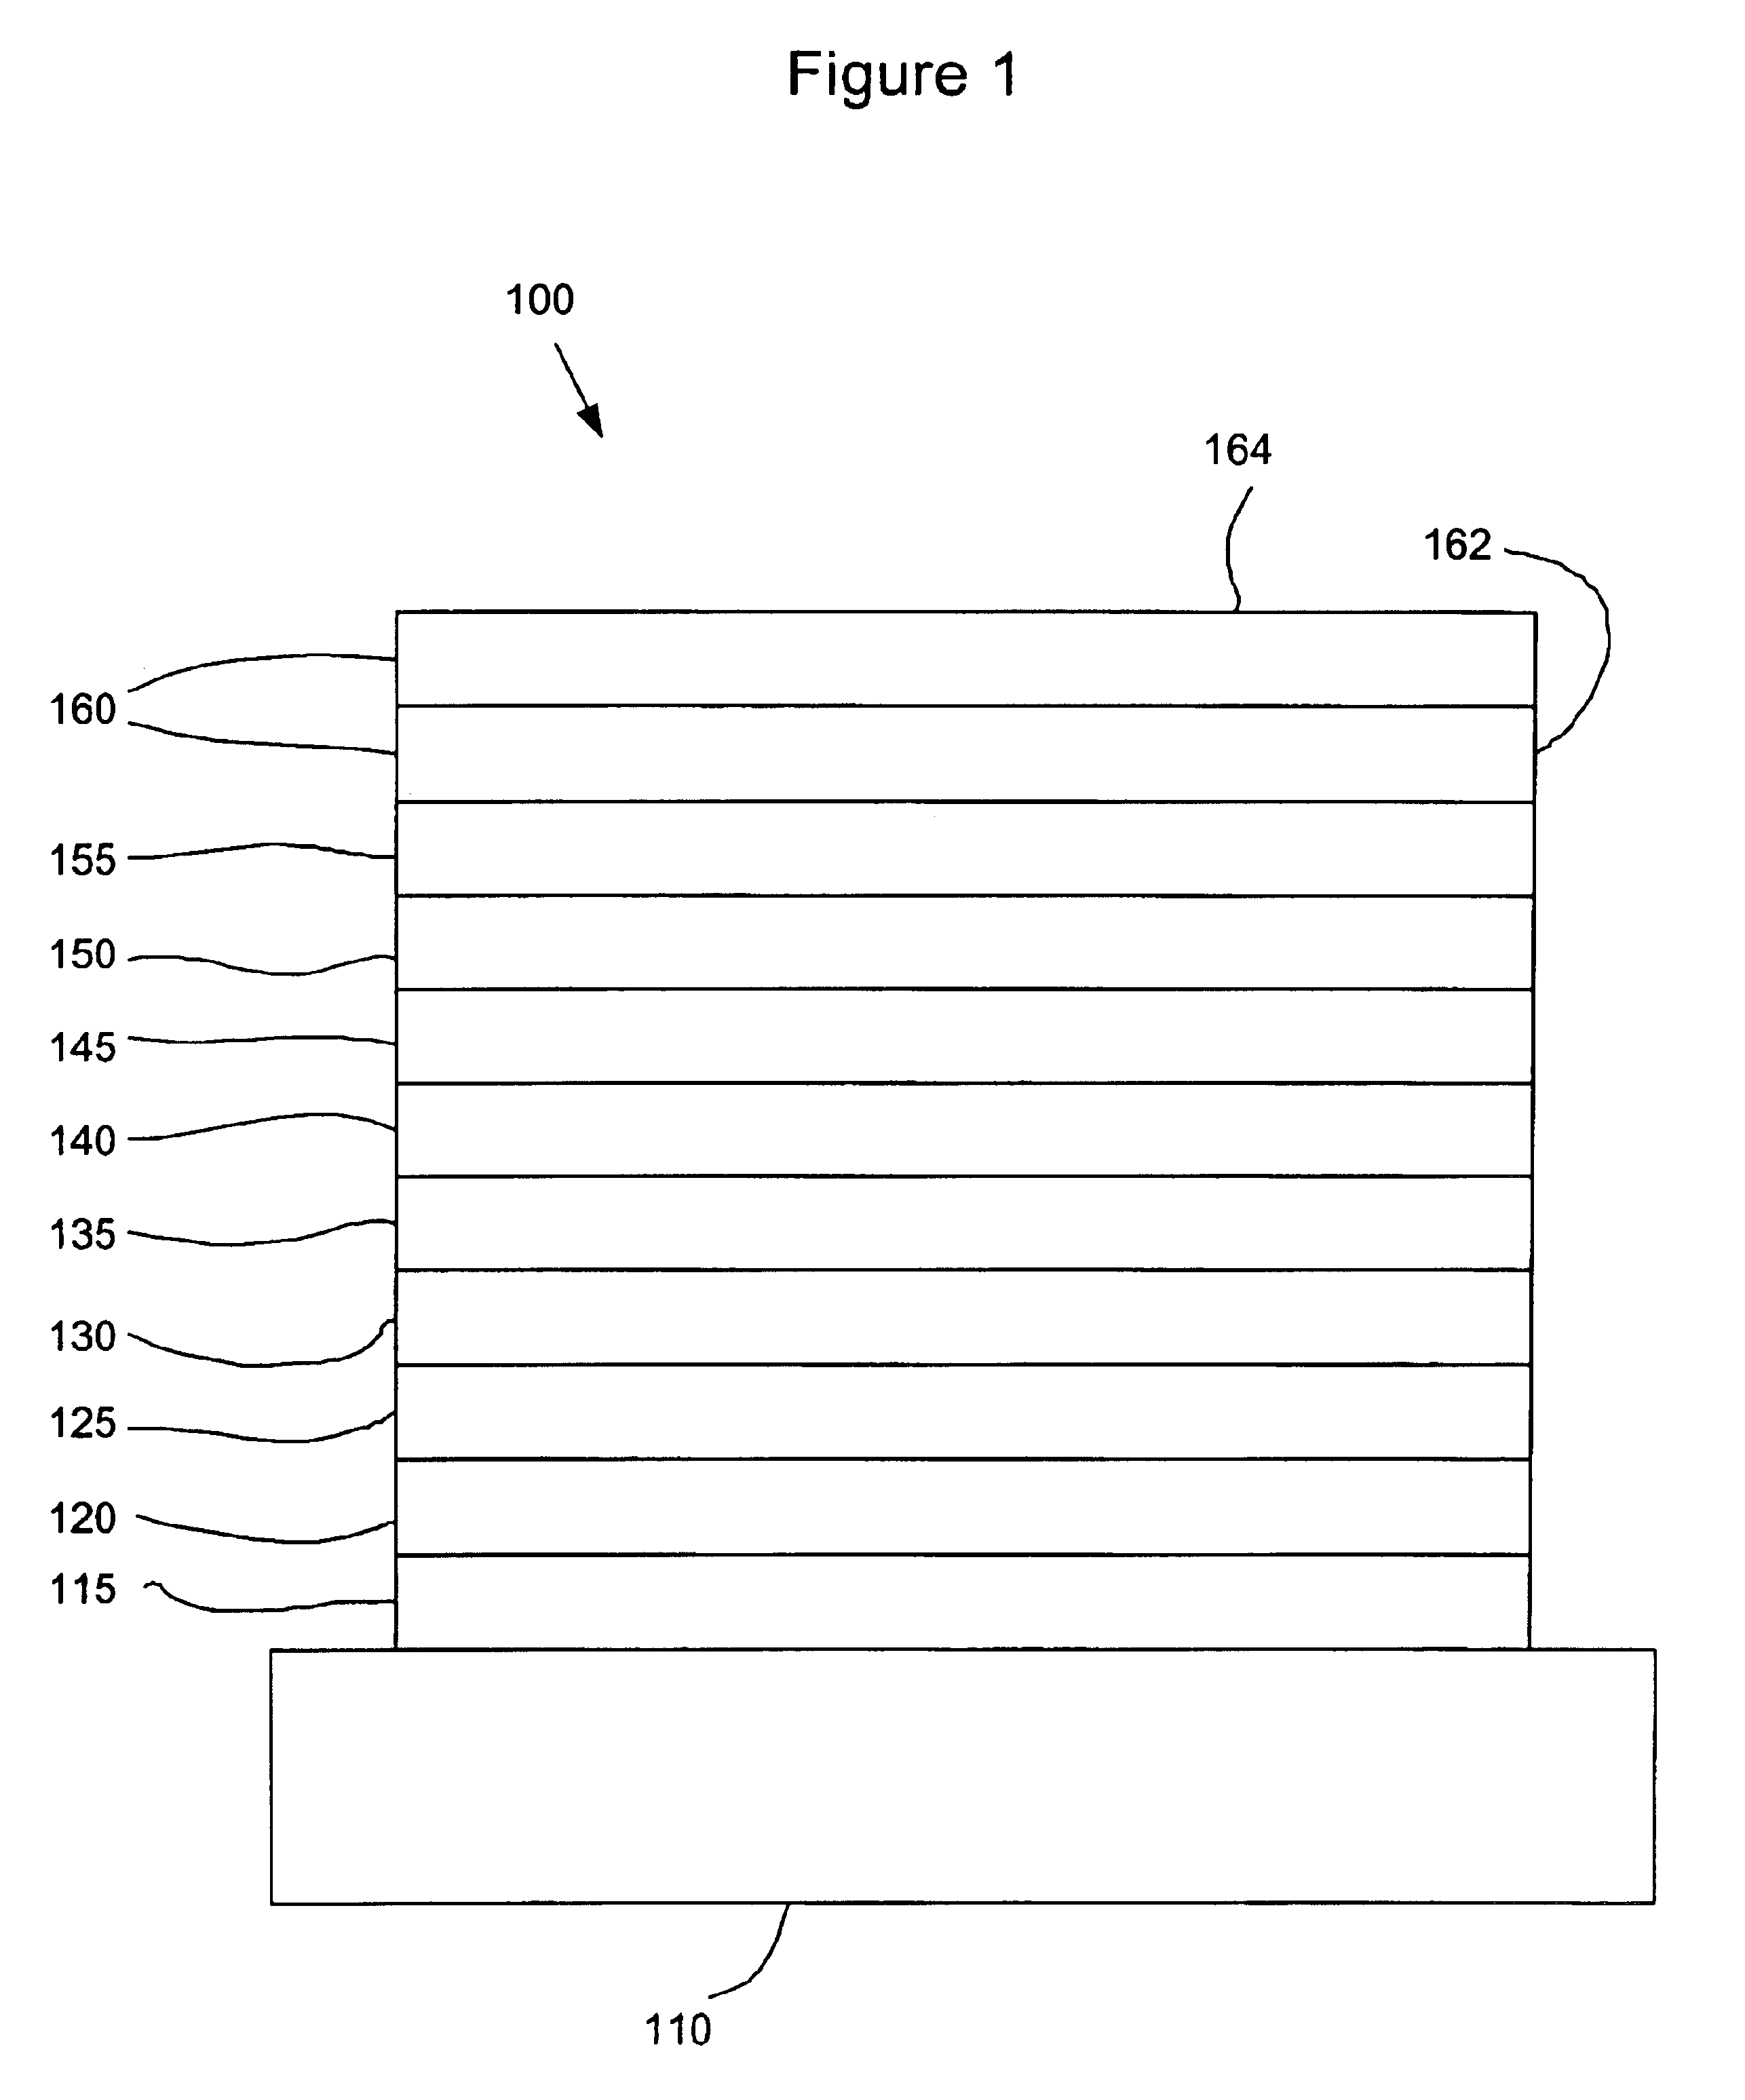 Organic light emitting device structures for obtaining chromaticity stability